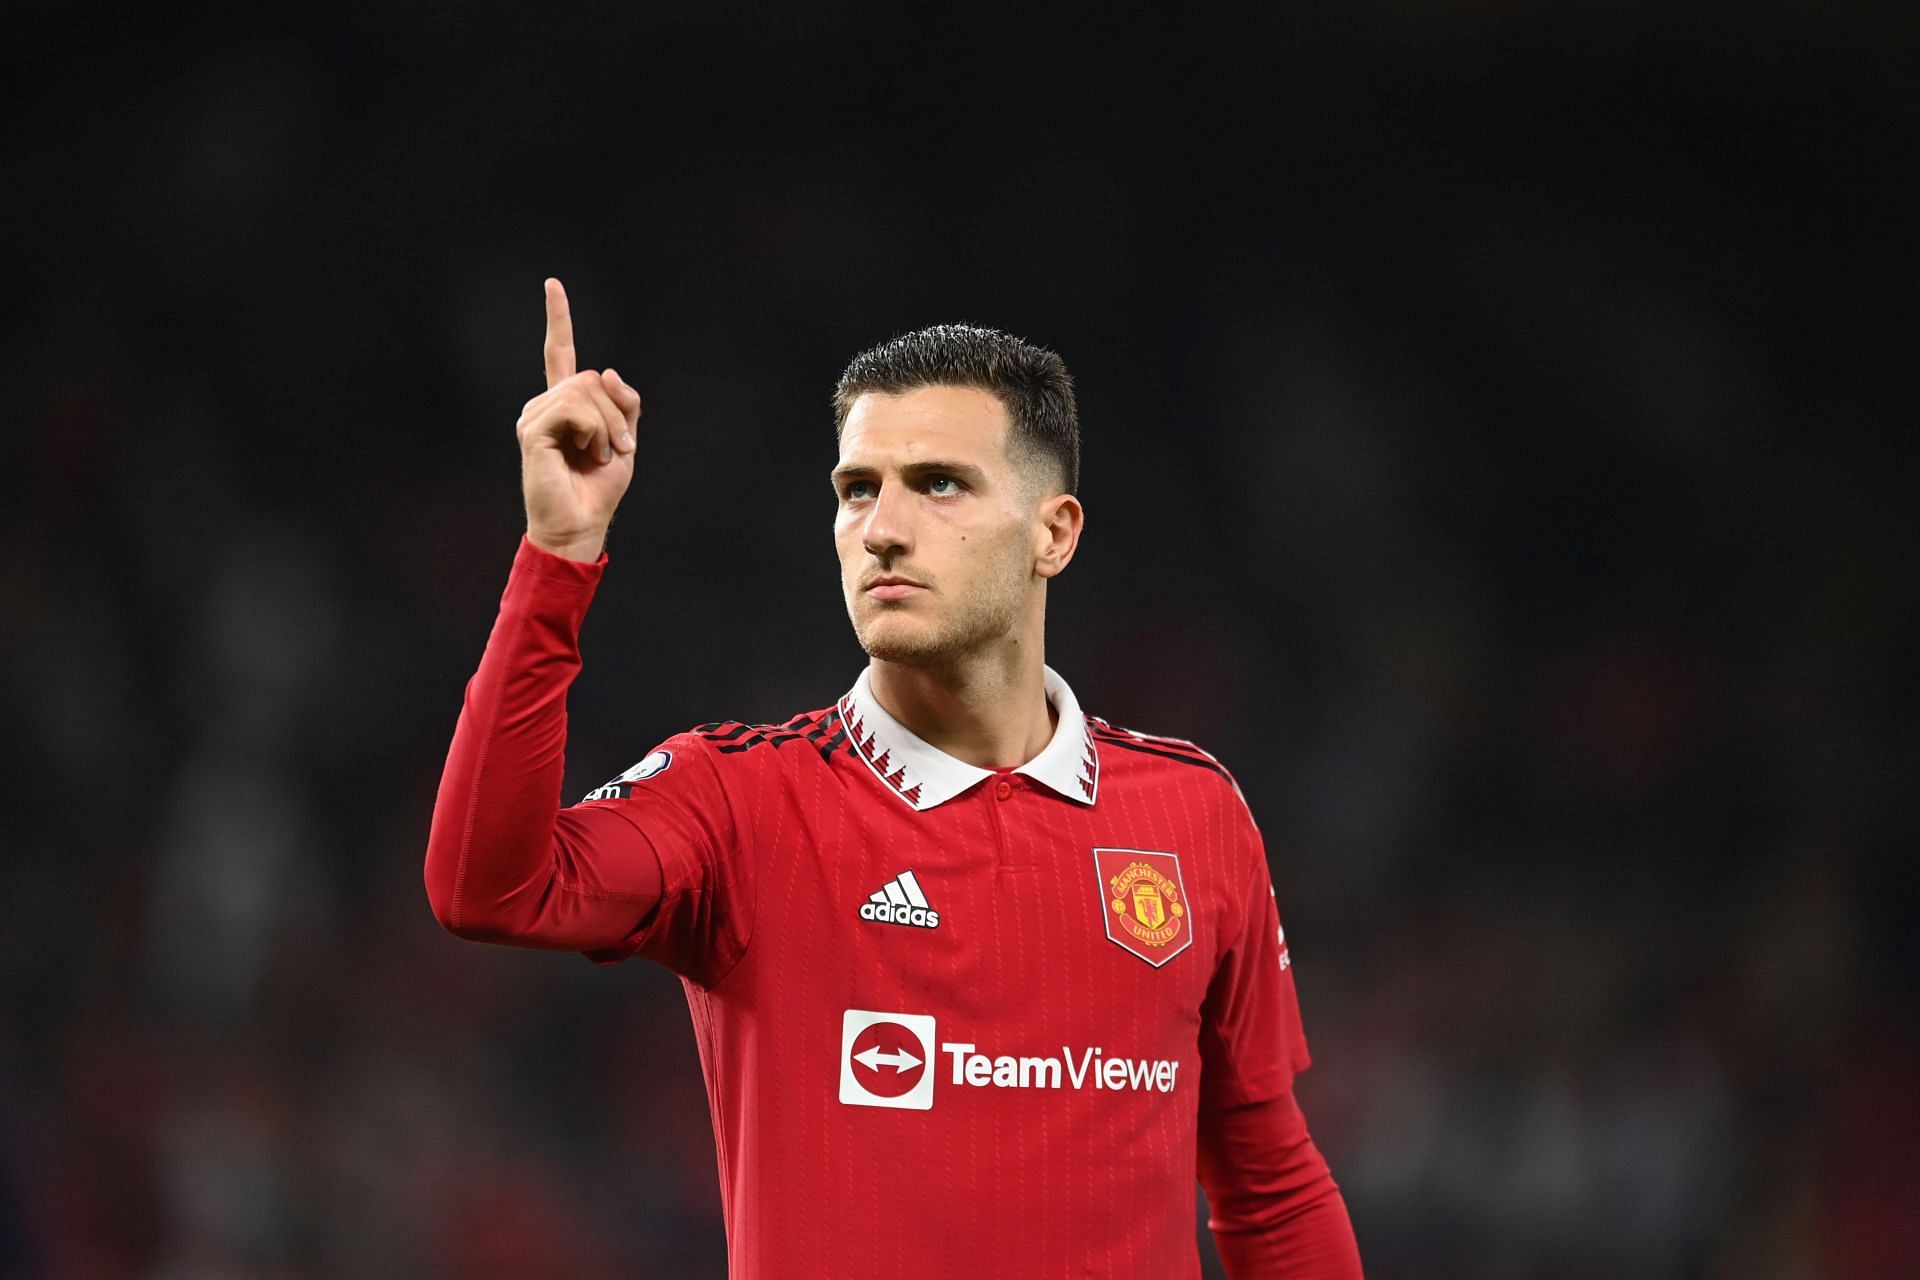 Dalot comments on rivalry with Wan-Bissaka